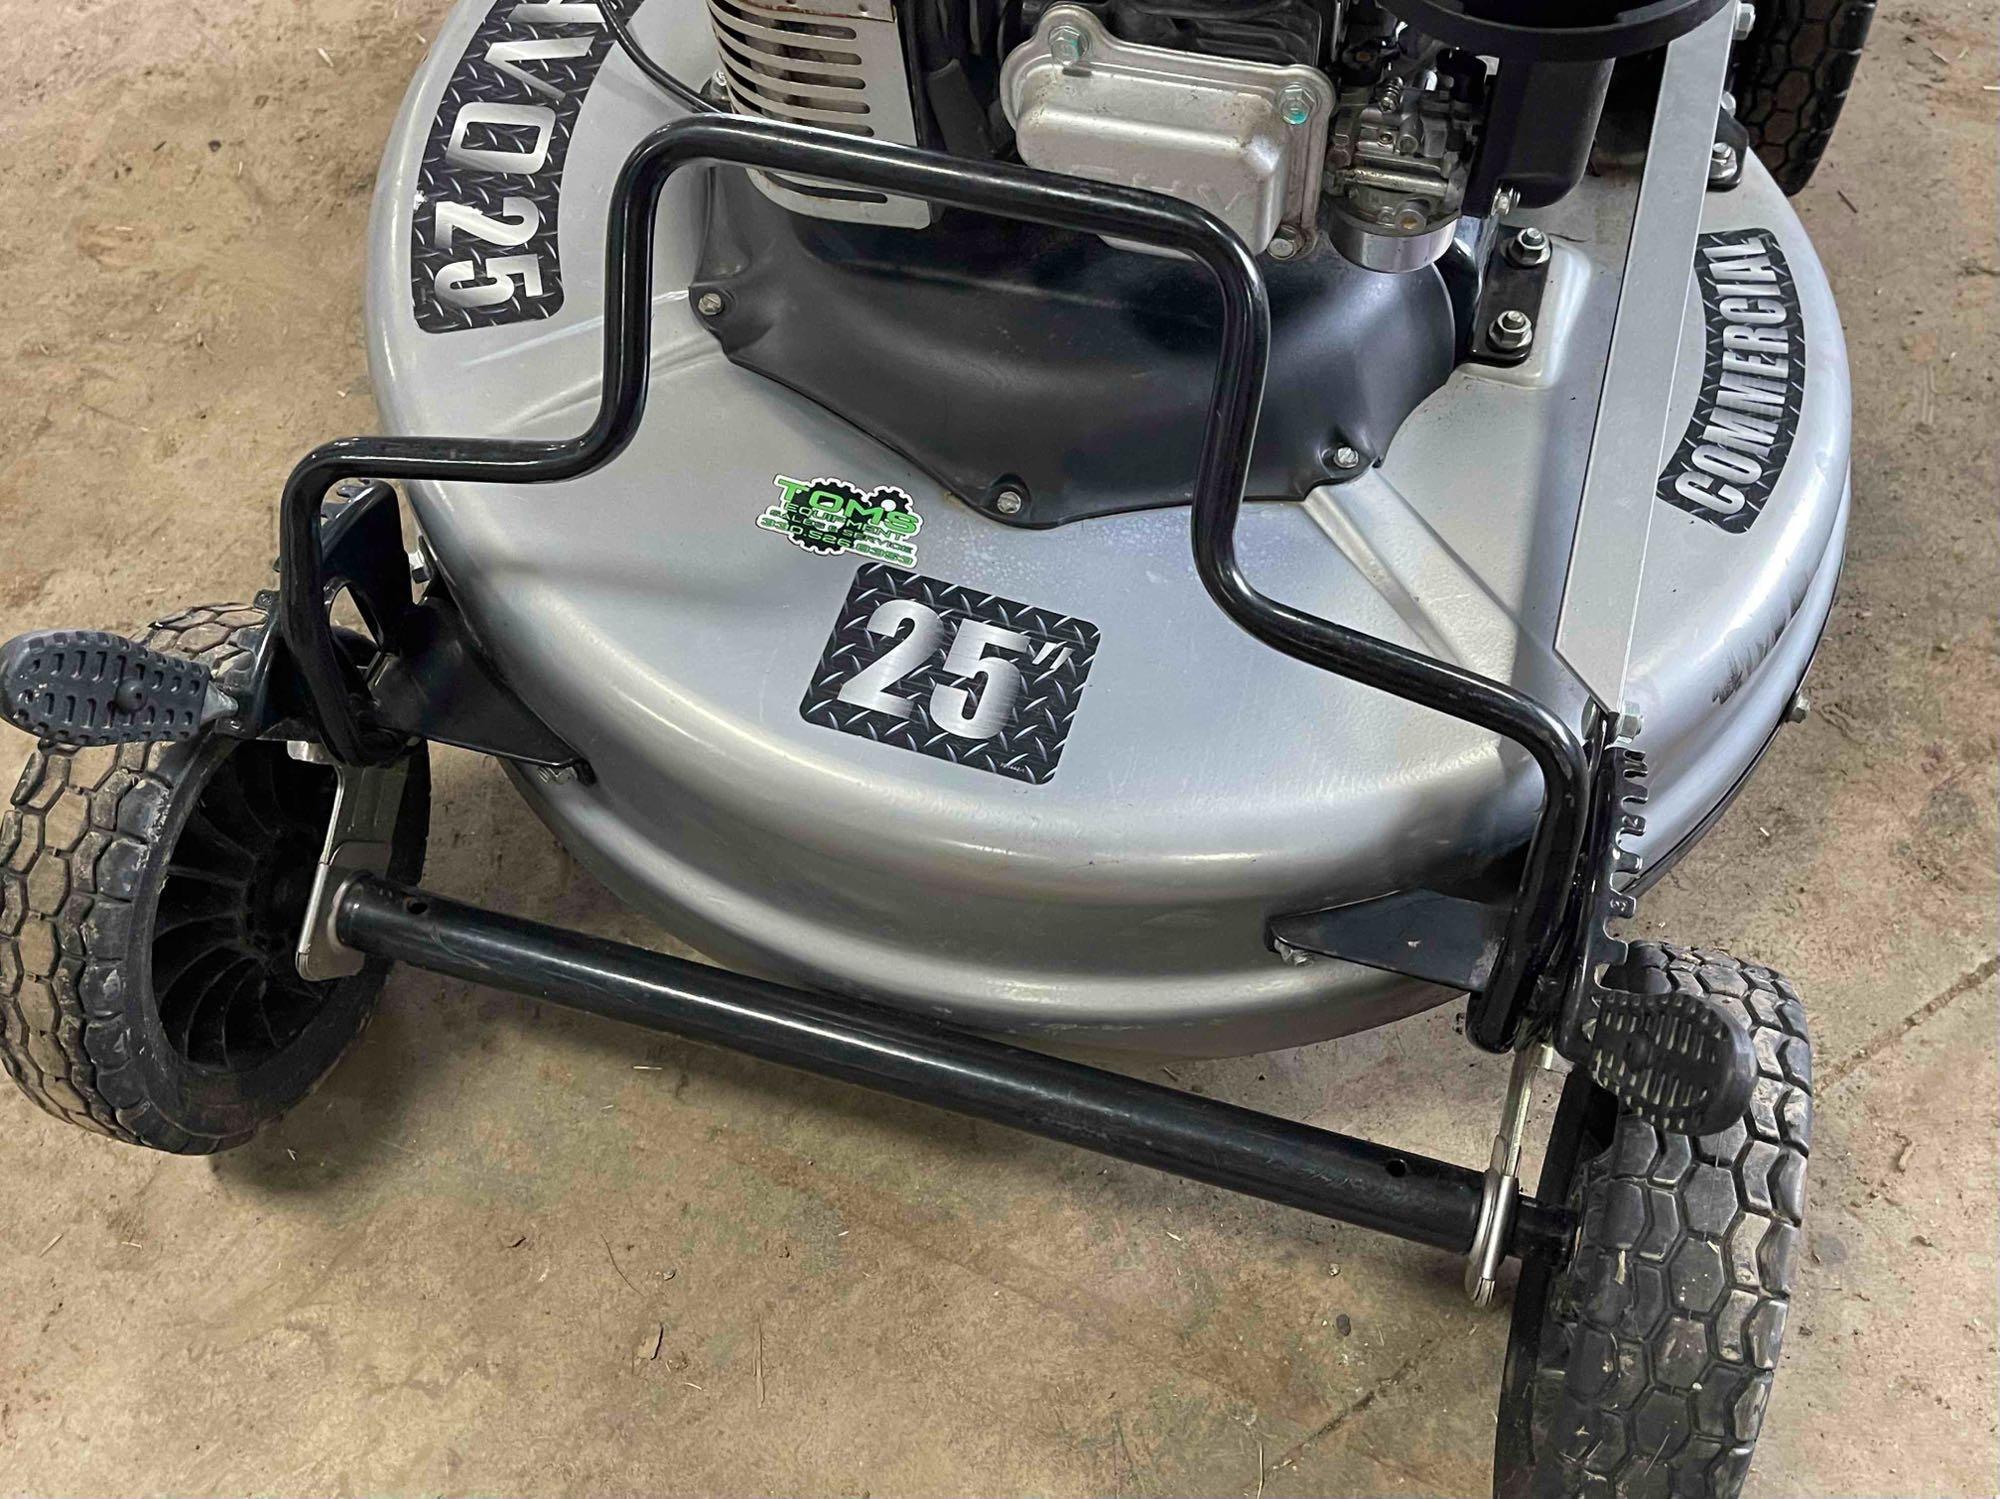 Bravo 25 inch commercial Mower, used very little